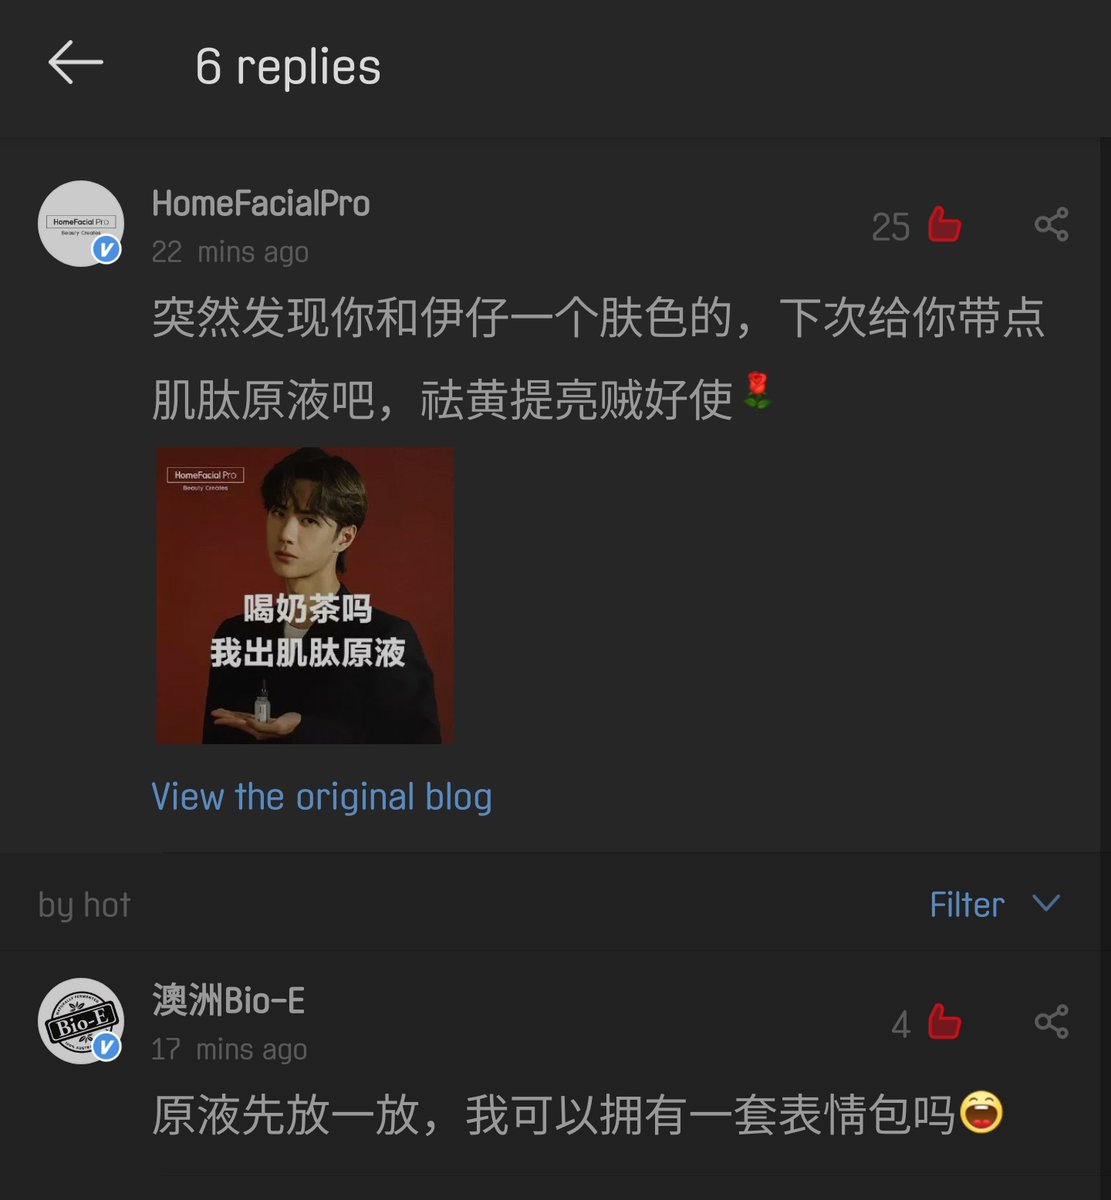 HFP also replied to Bio-E post :I suddenly realise you & Yi-zi (young Lyfen) have same skin color. Next time, I'll pass you carnosine solution, it can dispel yellow, brighten skin, easy to use Bio-E: Just put the original essence first, can I have the memes set instead 